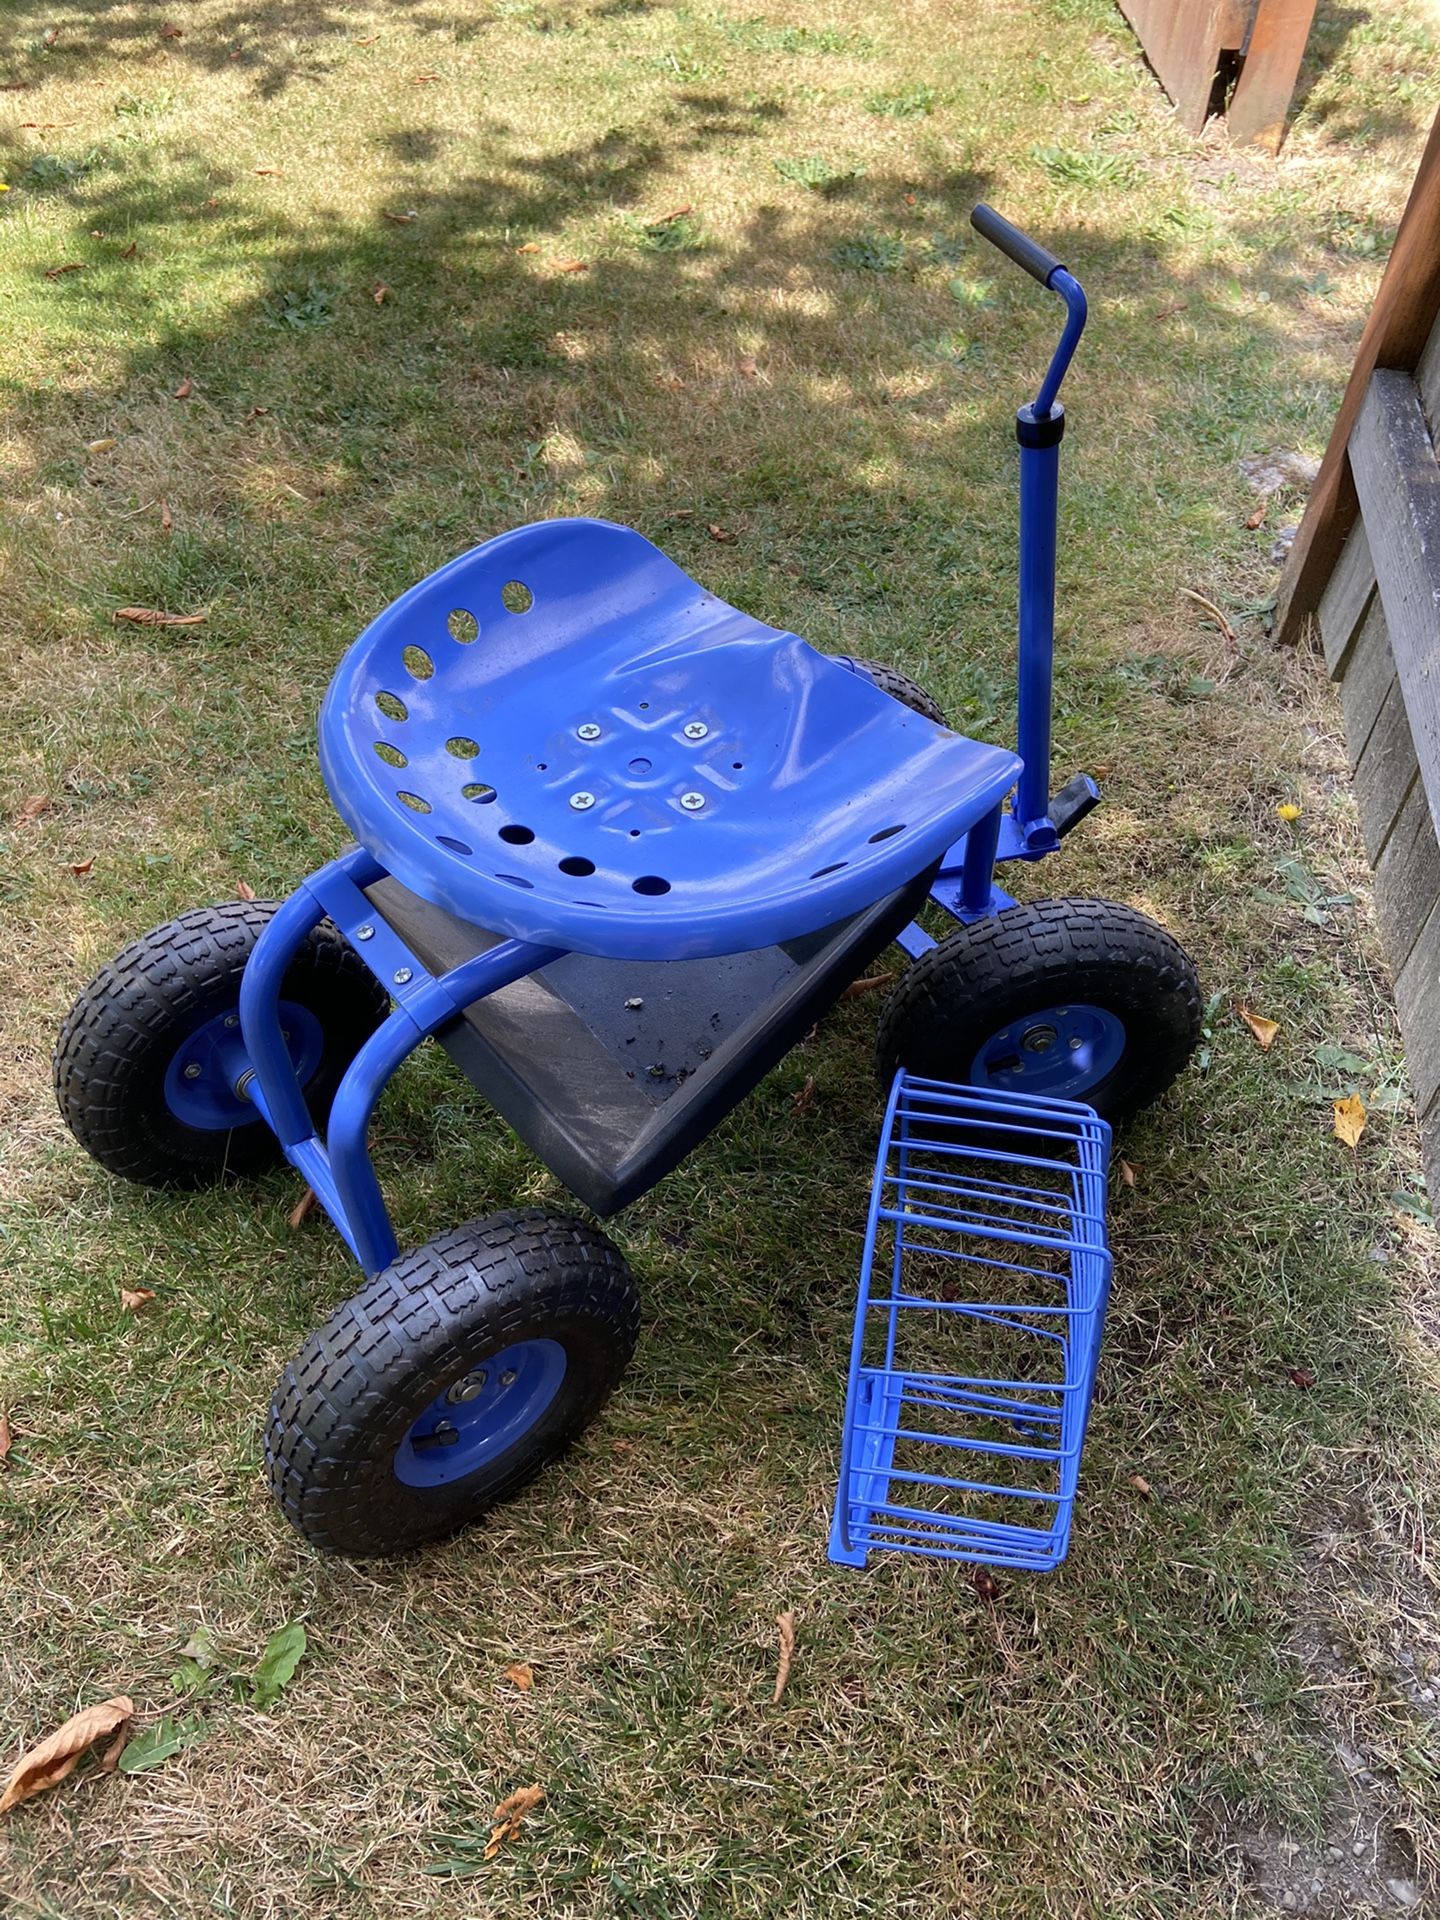 NEW => Tractor seat yard cart